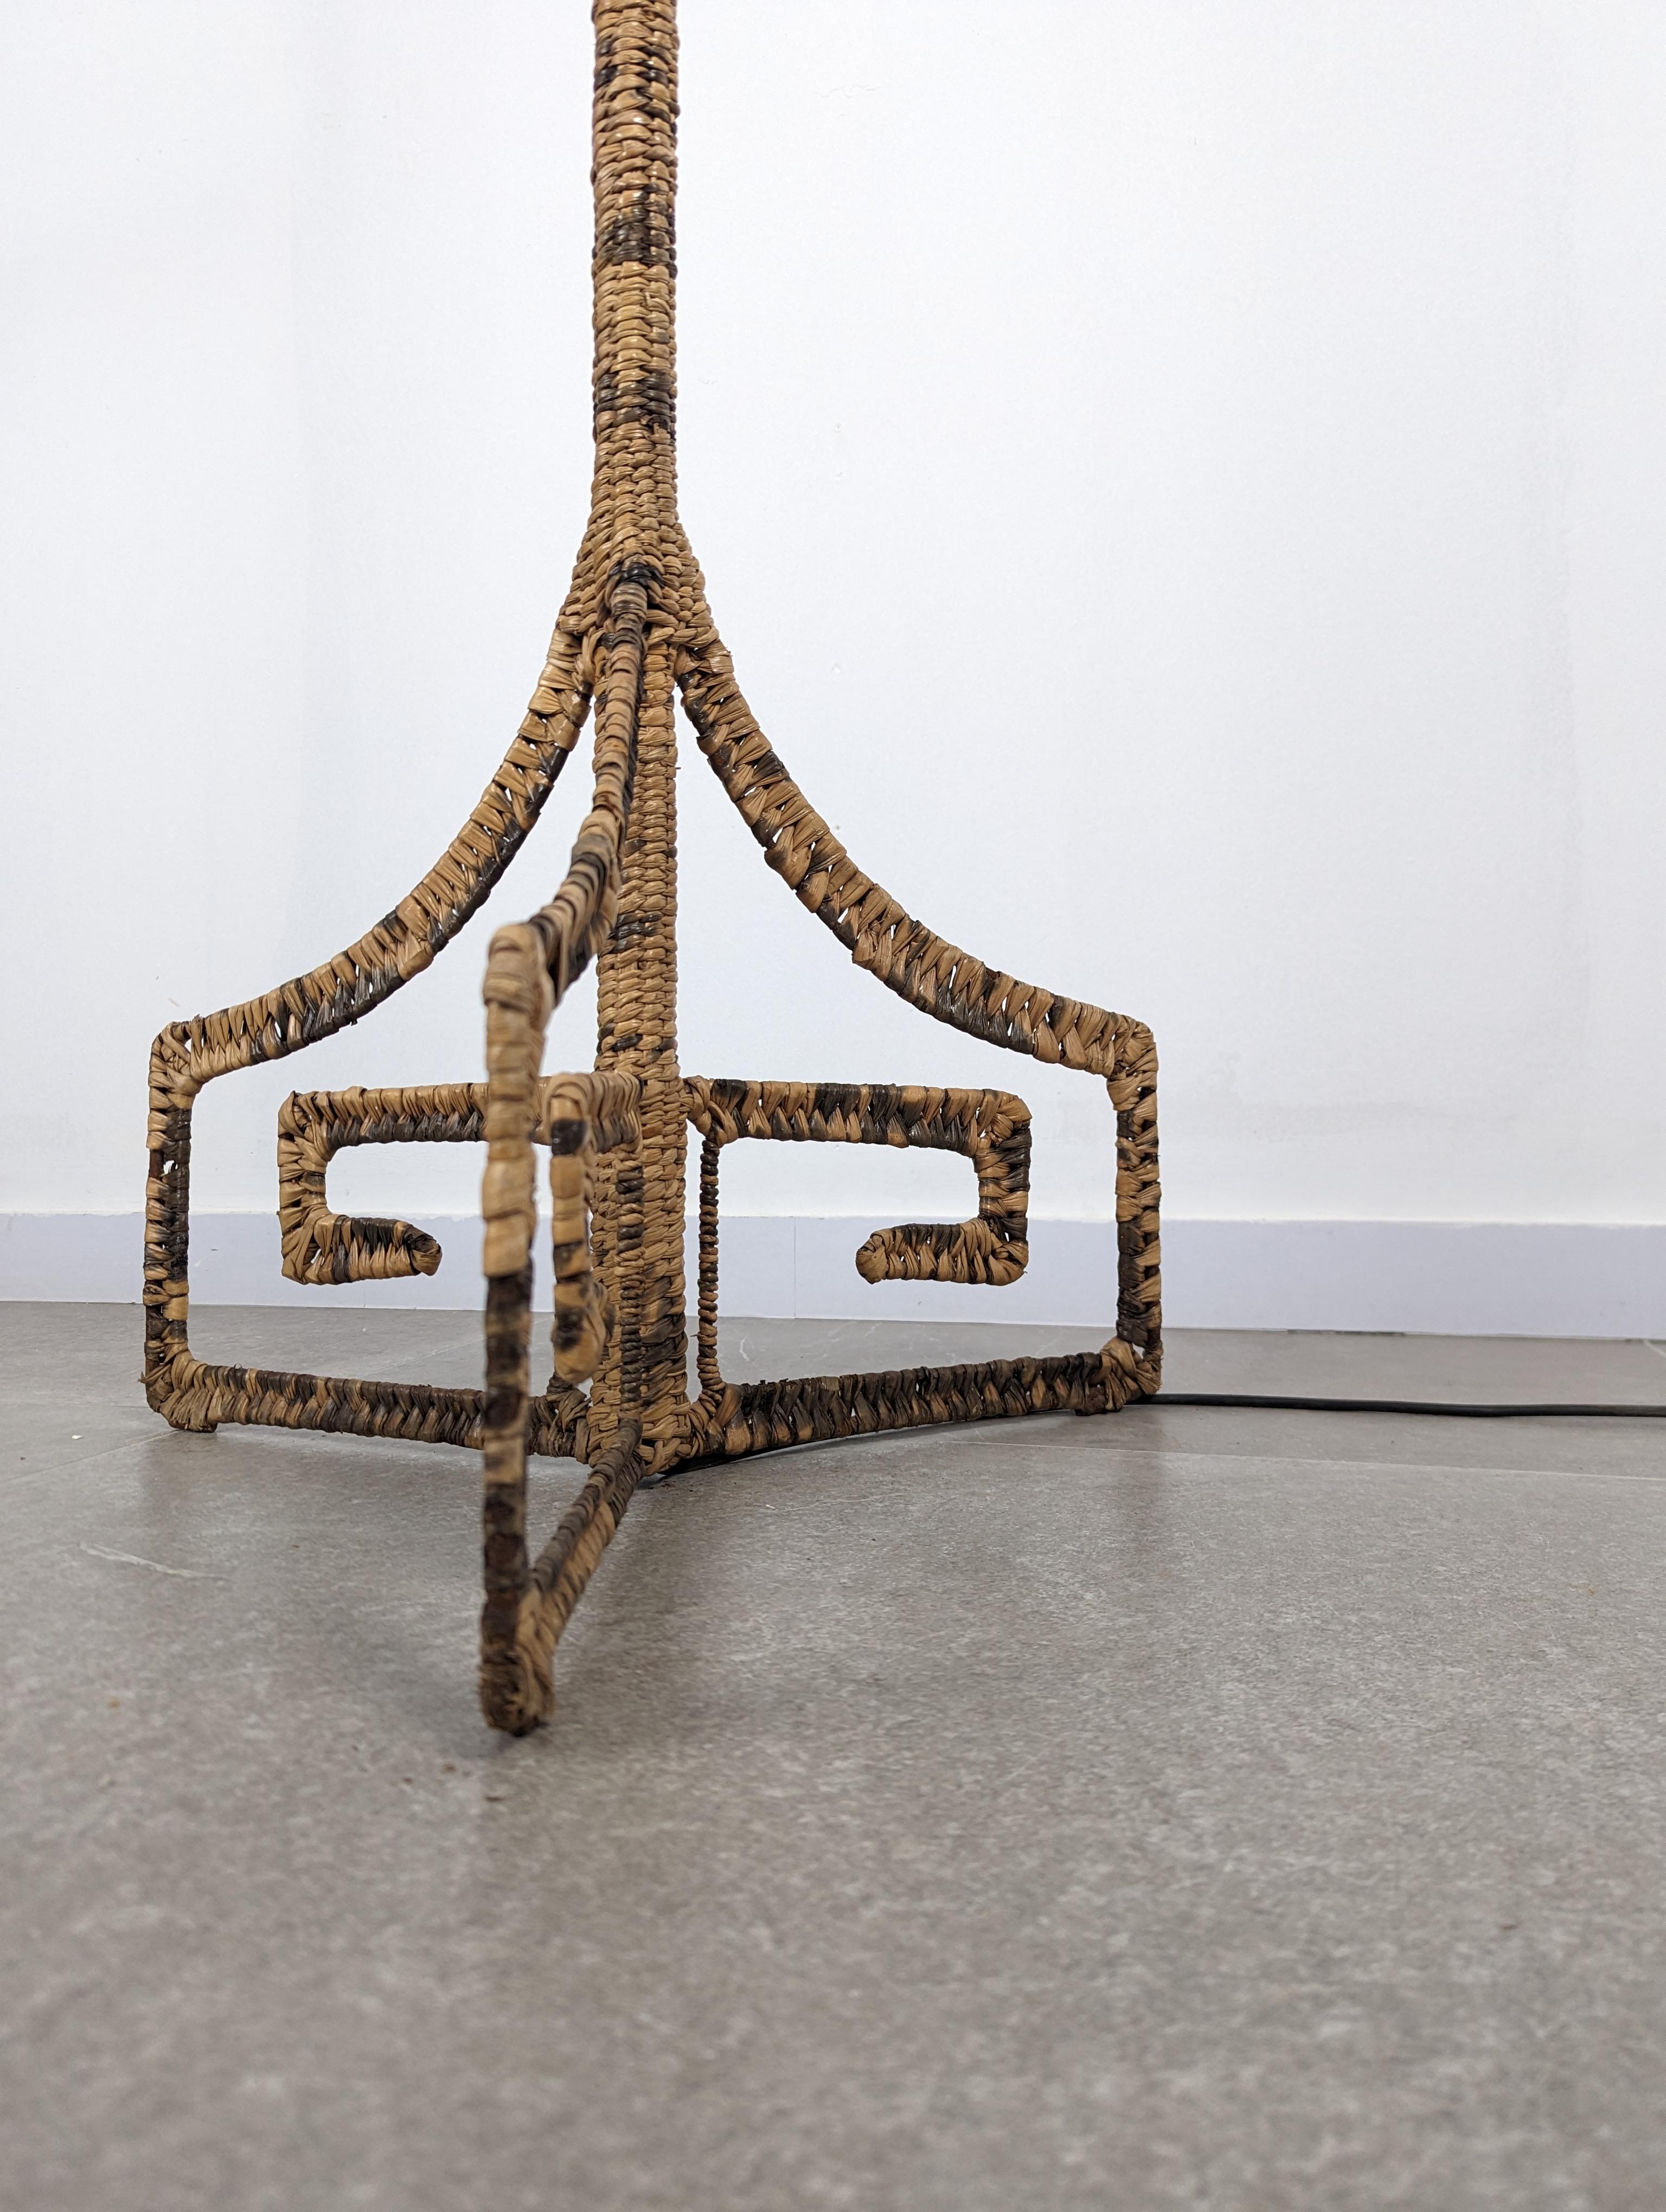 Floor lamp by Mexican artist and sculptor Mario López Torres made of iron woven with chuspata, its base with an elegant Greek key shape at the base creates an exclusive original mid-century floor lamp.